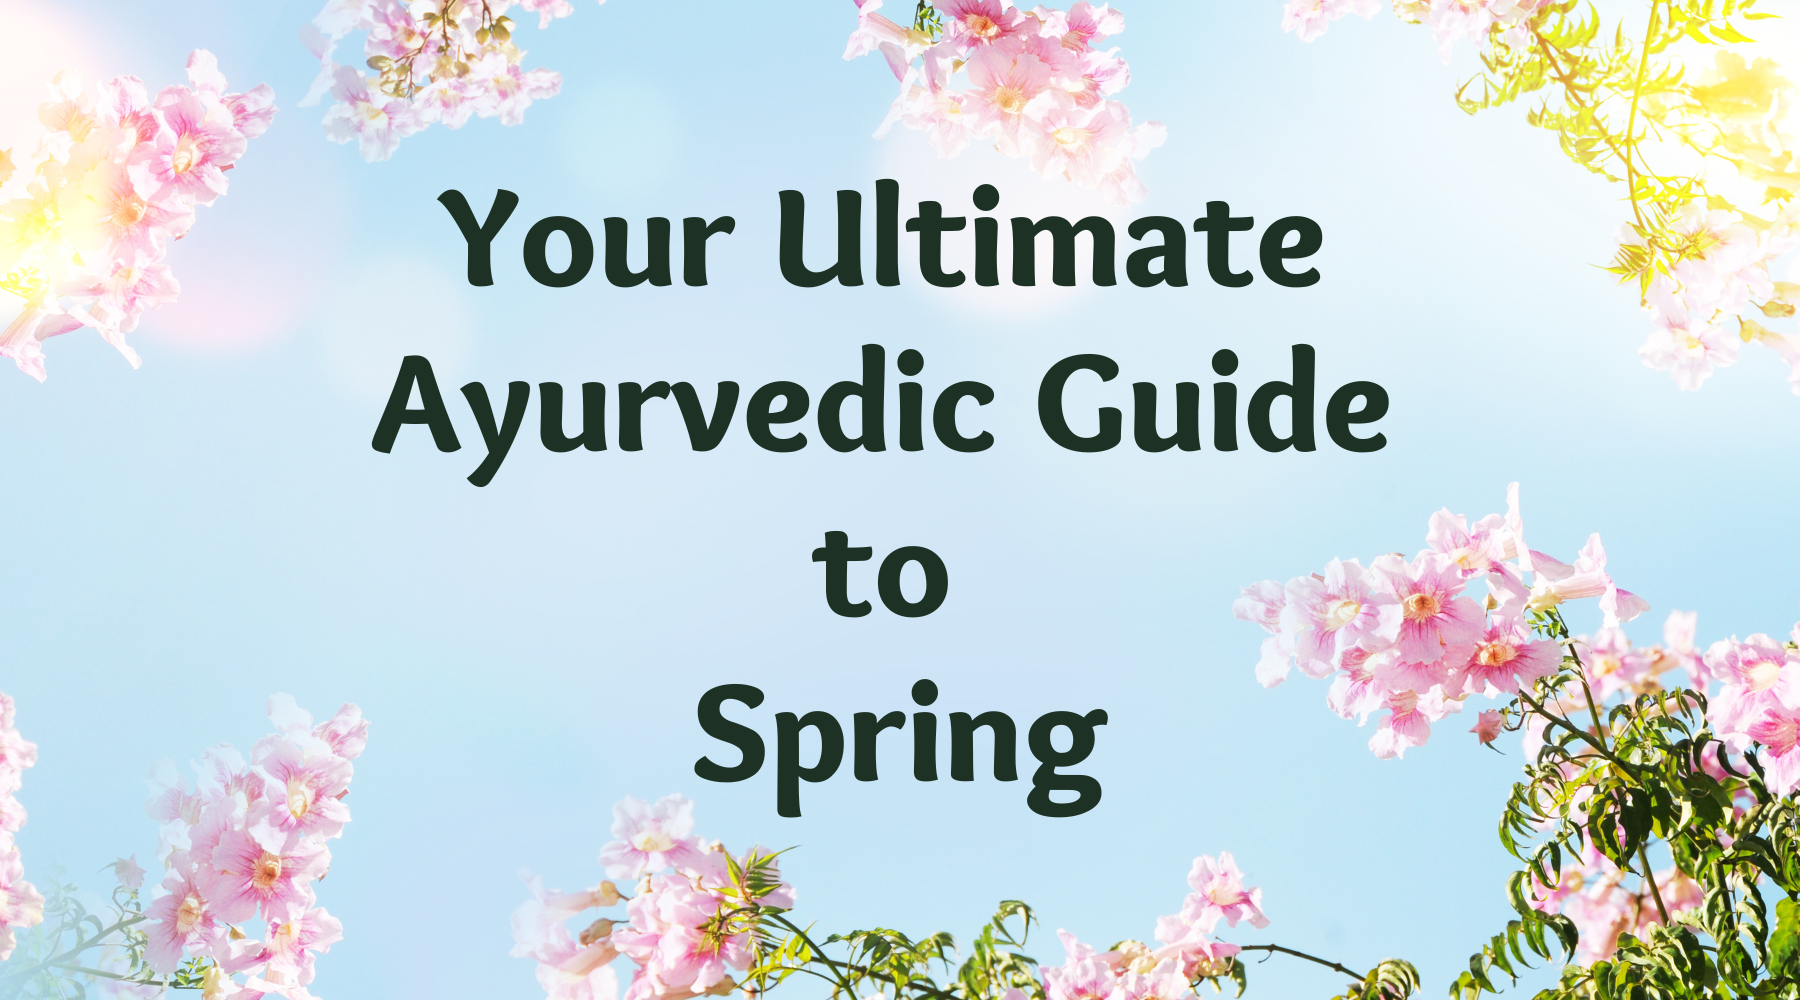 Your Ultimate Ayurvedic Guide to Spring